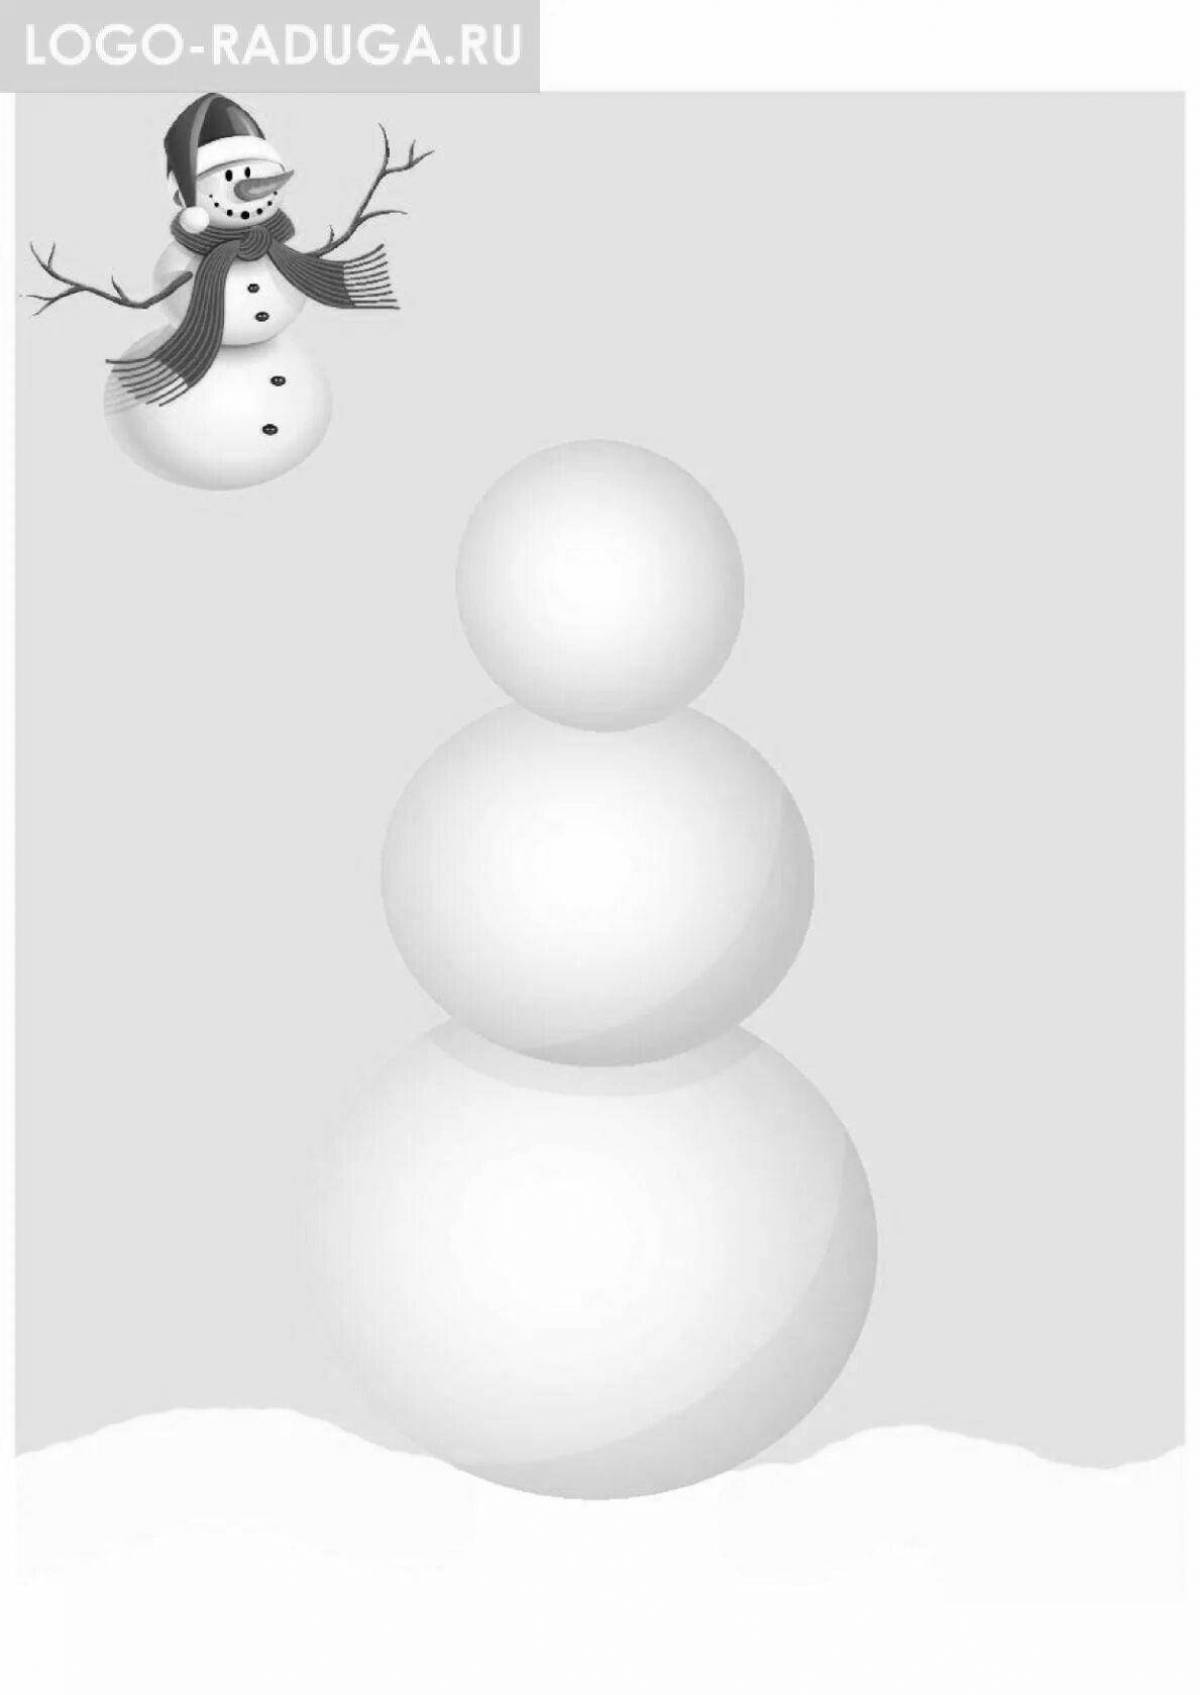 Snowman without nose #2